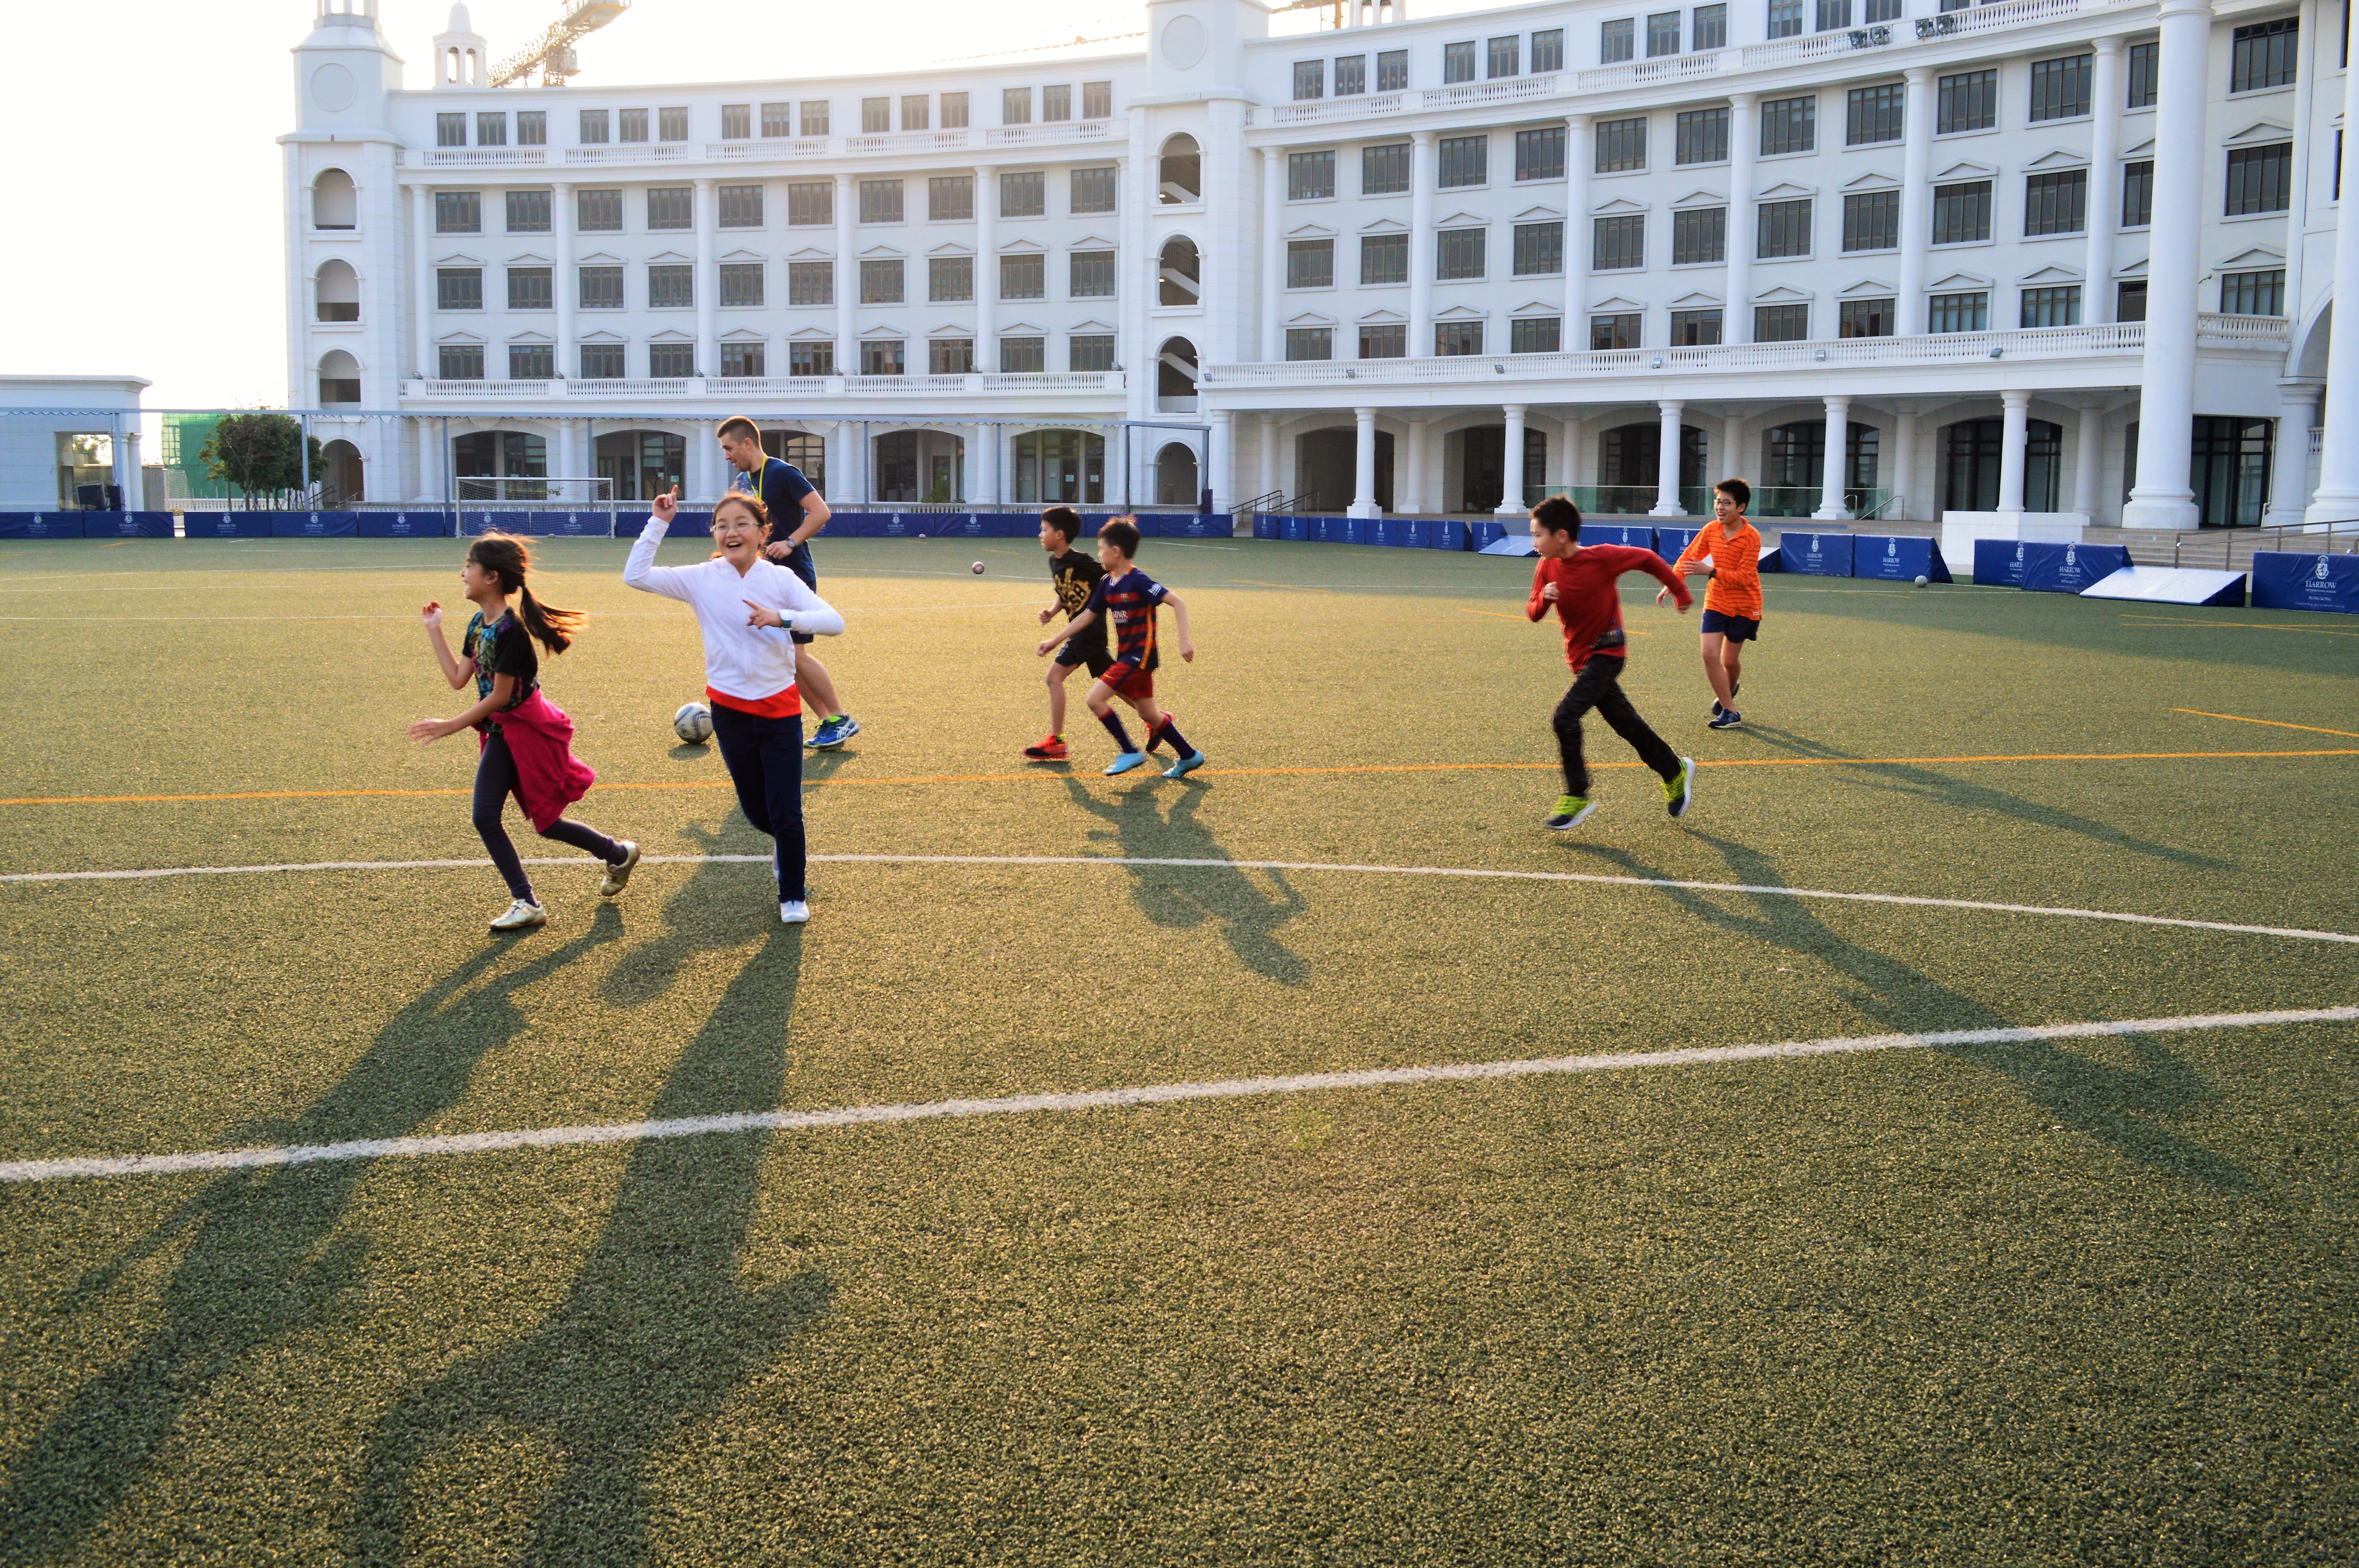 Just over half of international schools in Hong Kong, such as Harrow International School, require parents to stump up non-refundable capital levies and debentures to score their children a place. Photo: Anglo Academy